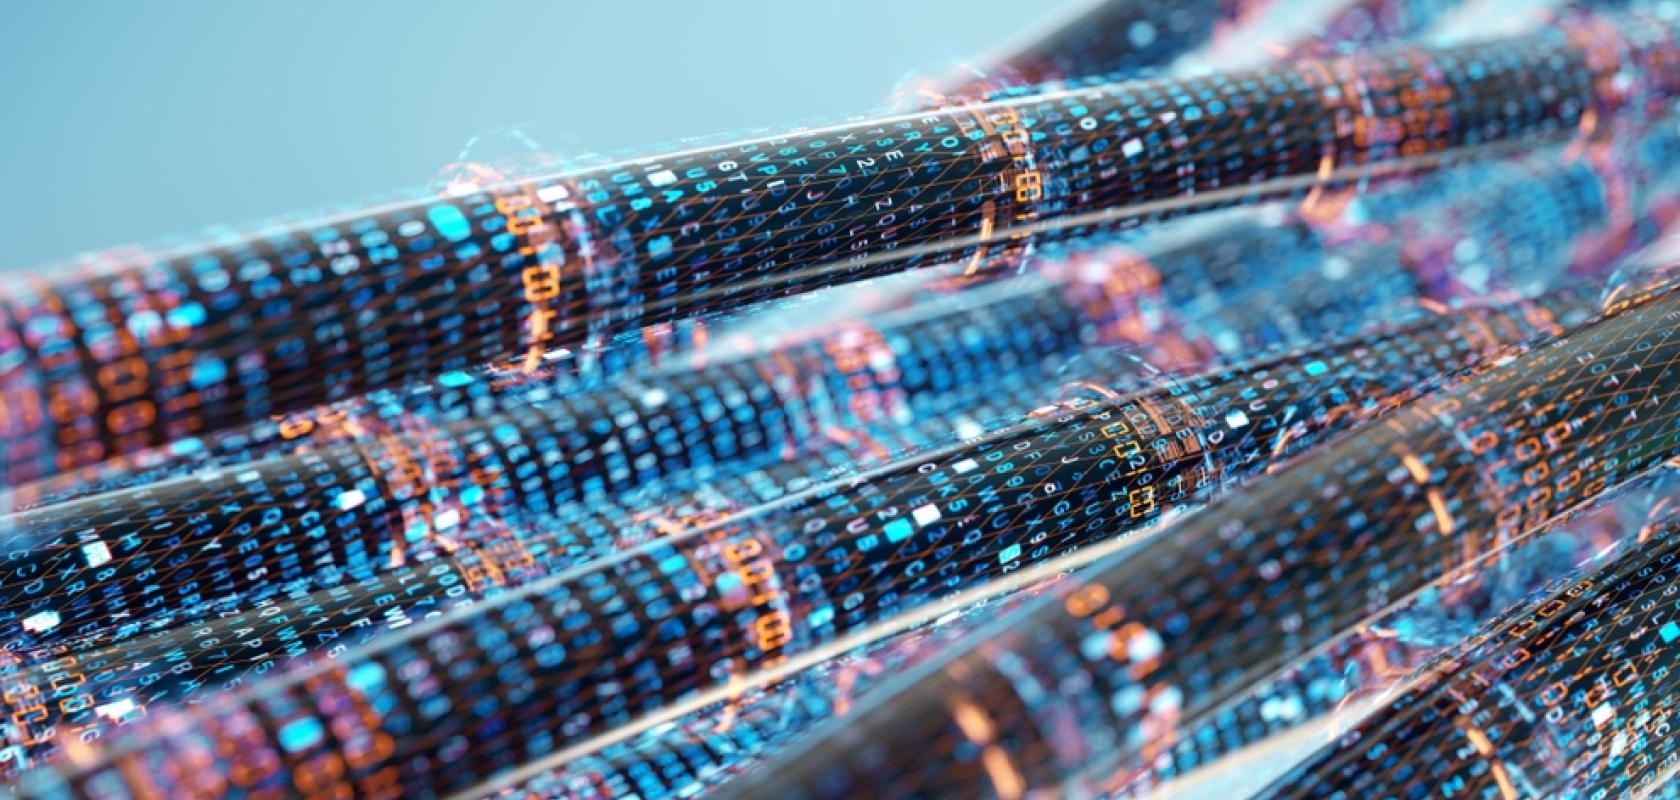 State of California Department of Technology is to tackle the digital divide with a multi-billion dollar investment in fibre technology